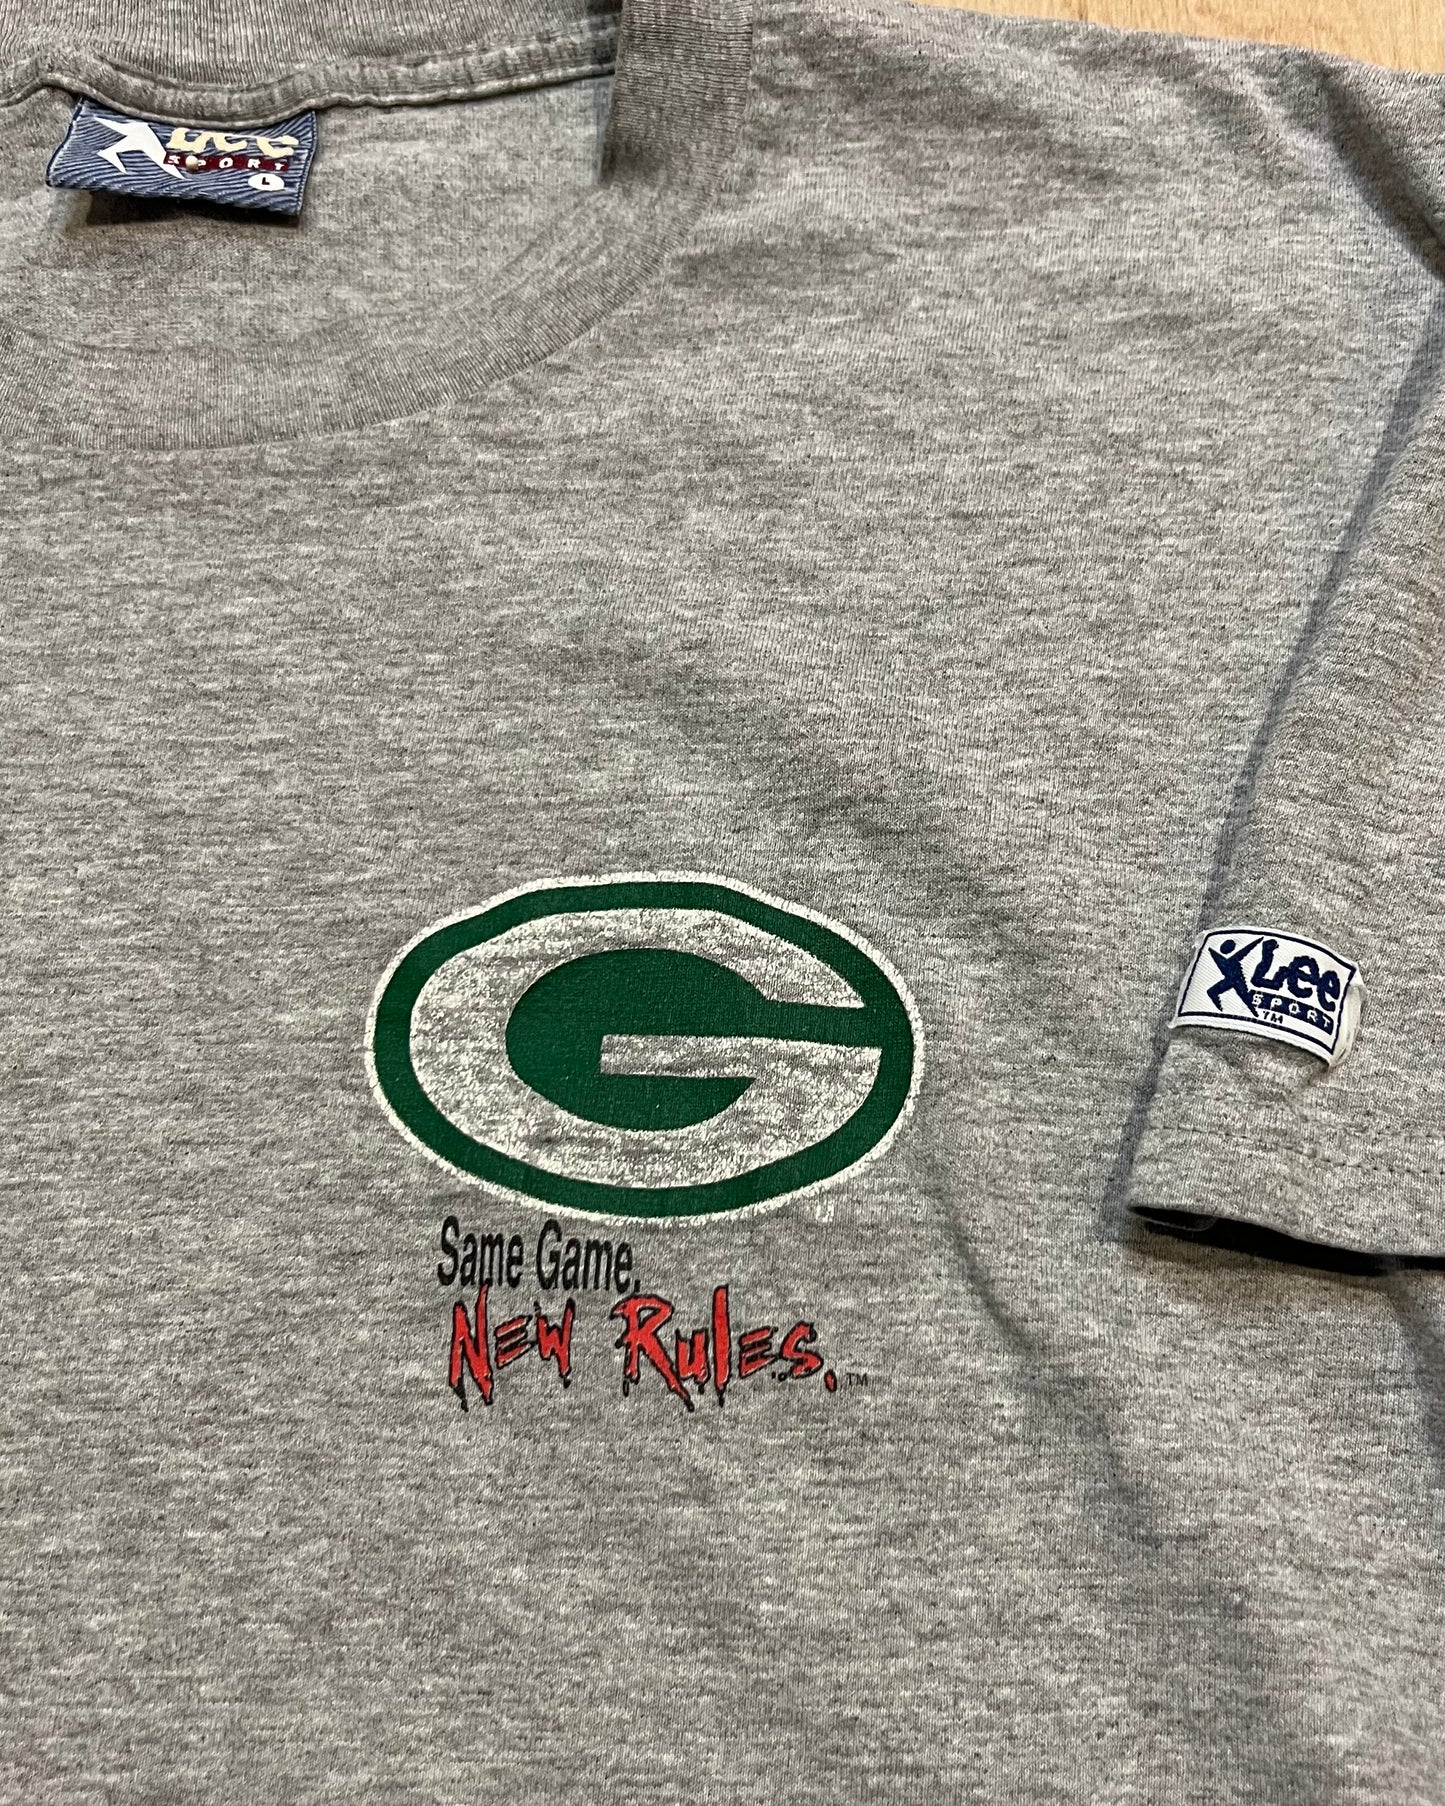 1995 Green Bay Packers "Same Game. New Rules" Lee Sports T-Shirt